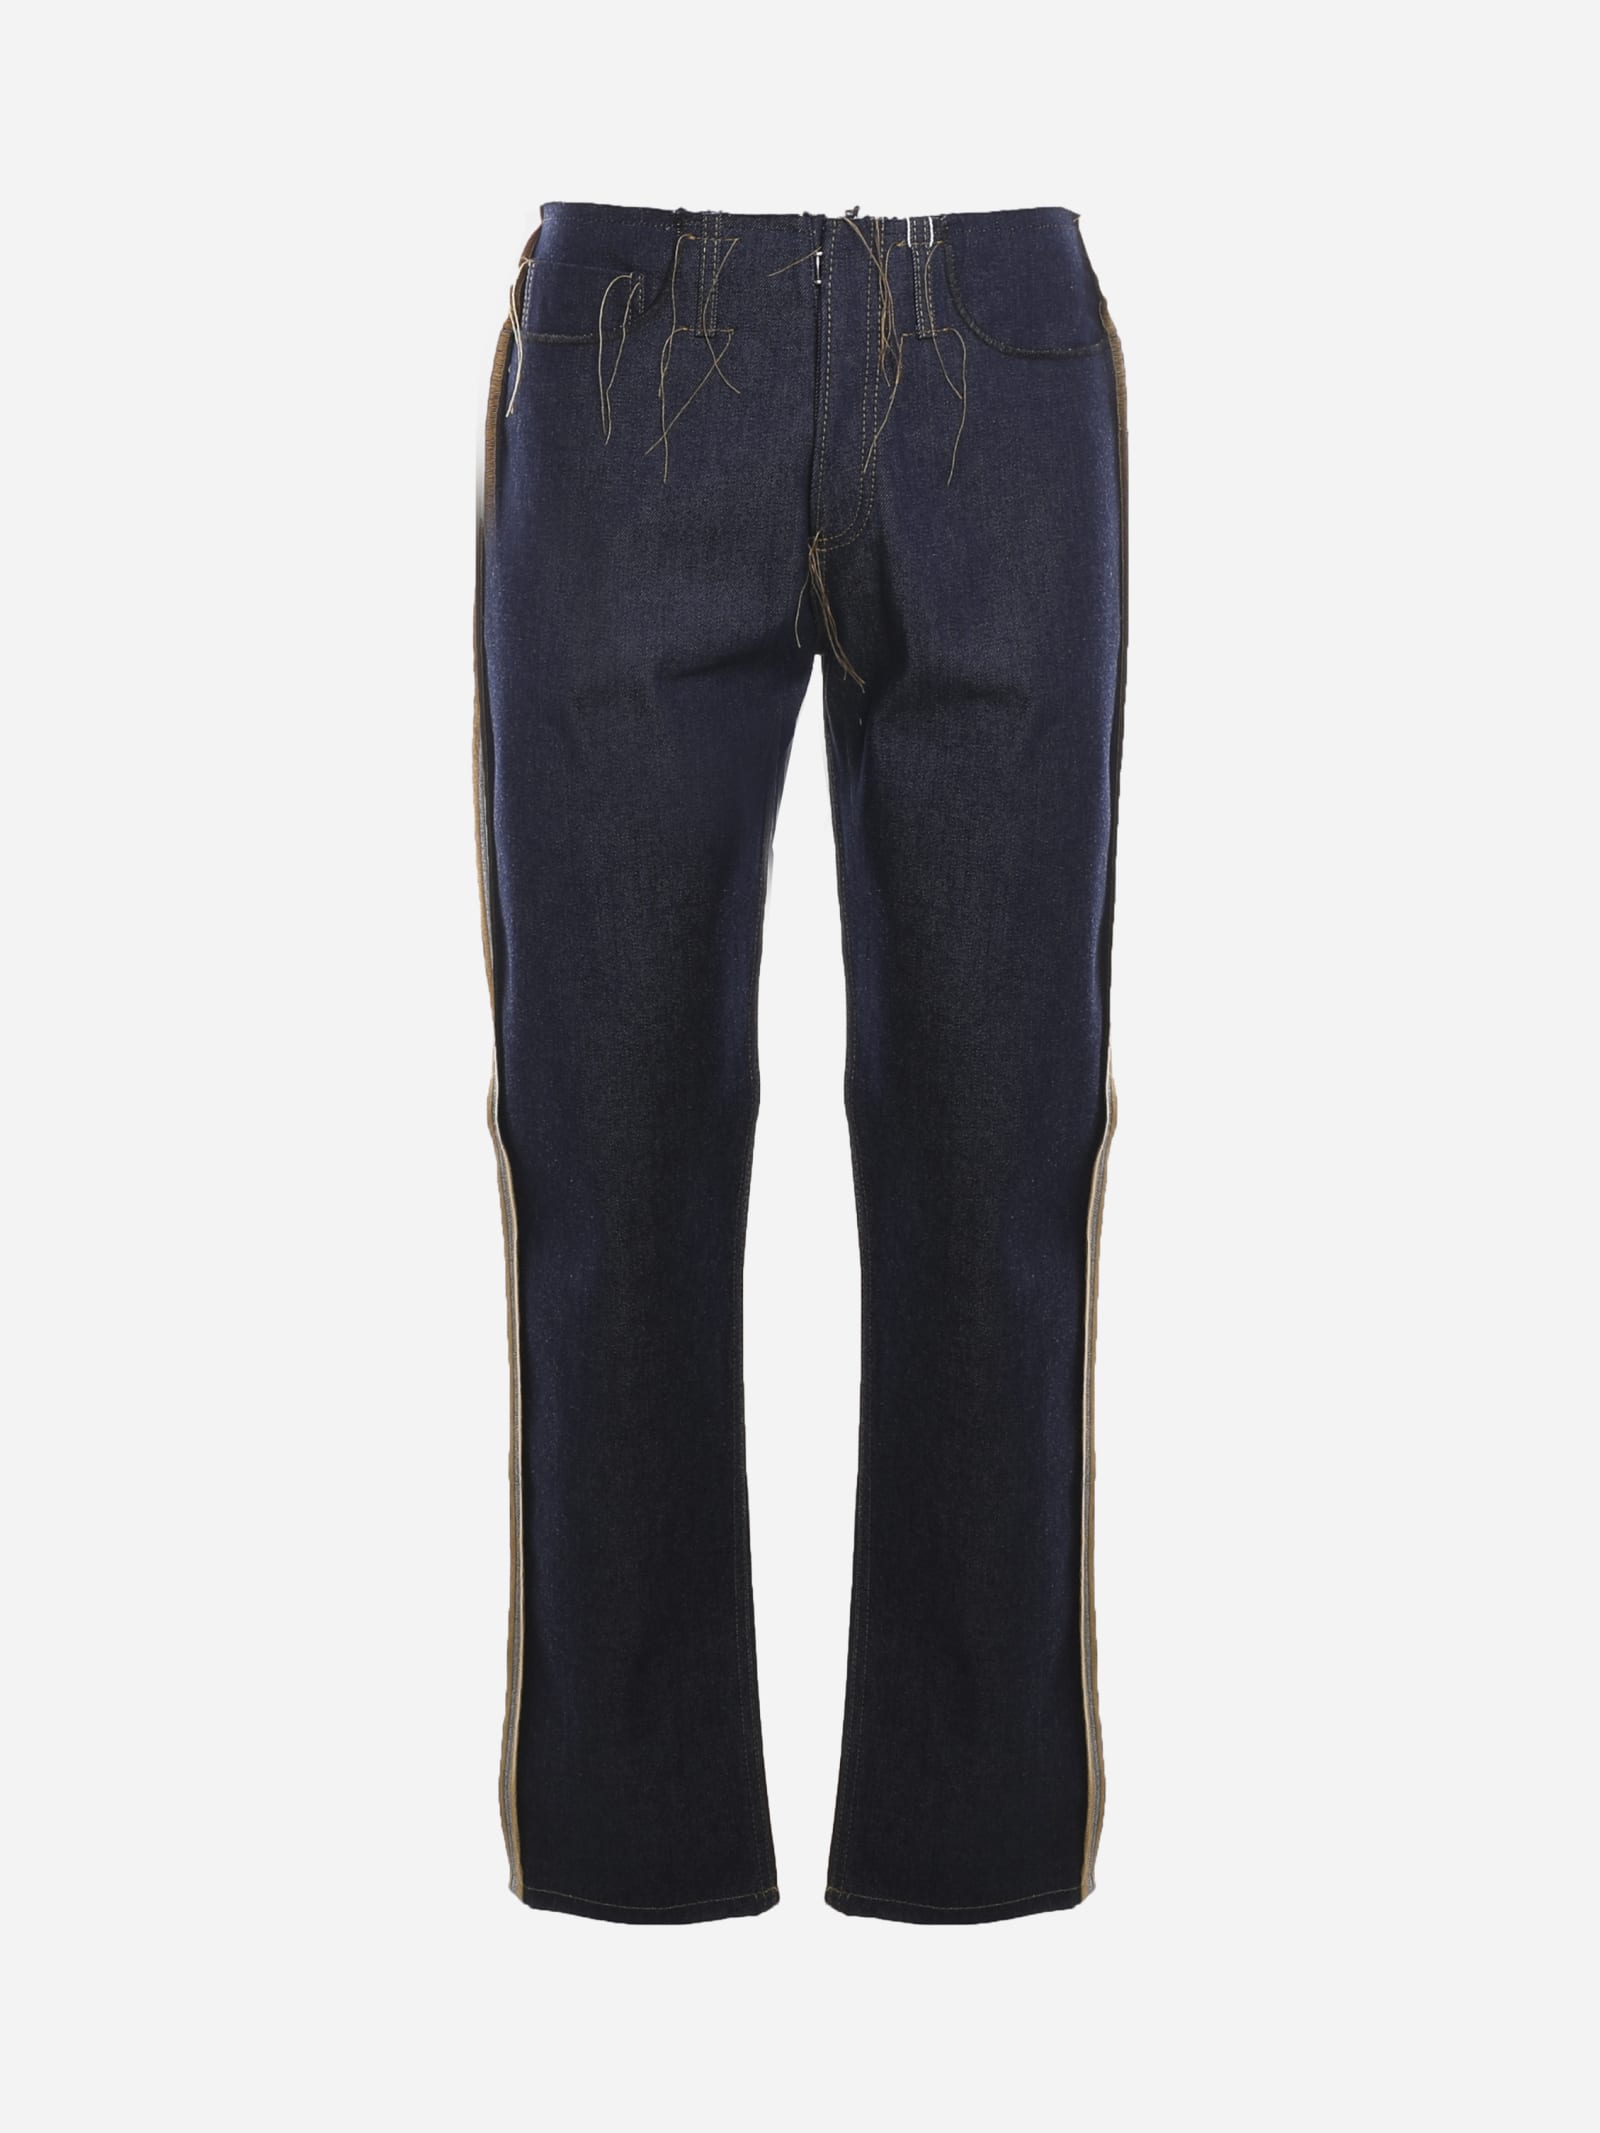 Maison Margiela Cotton Jeans With Contrasting Side Bands And Raw Cuts